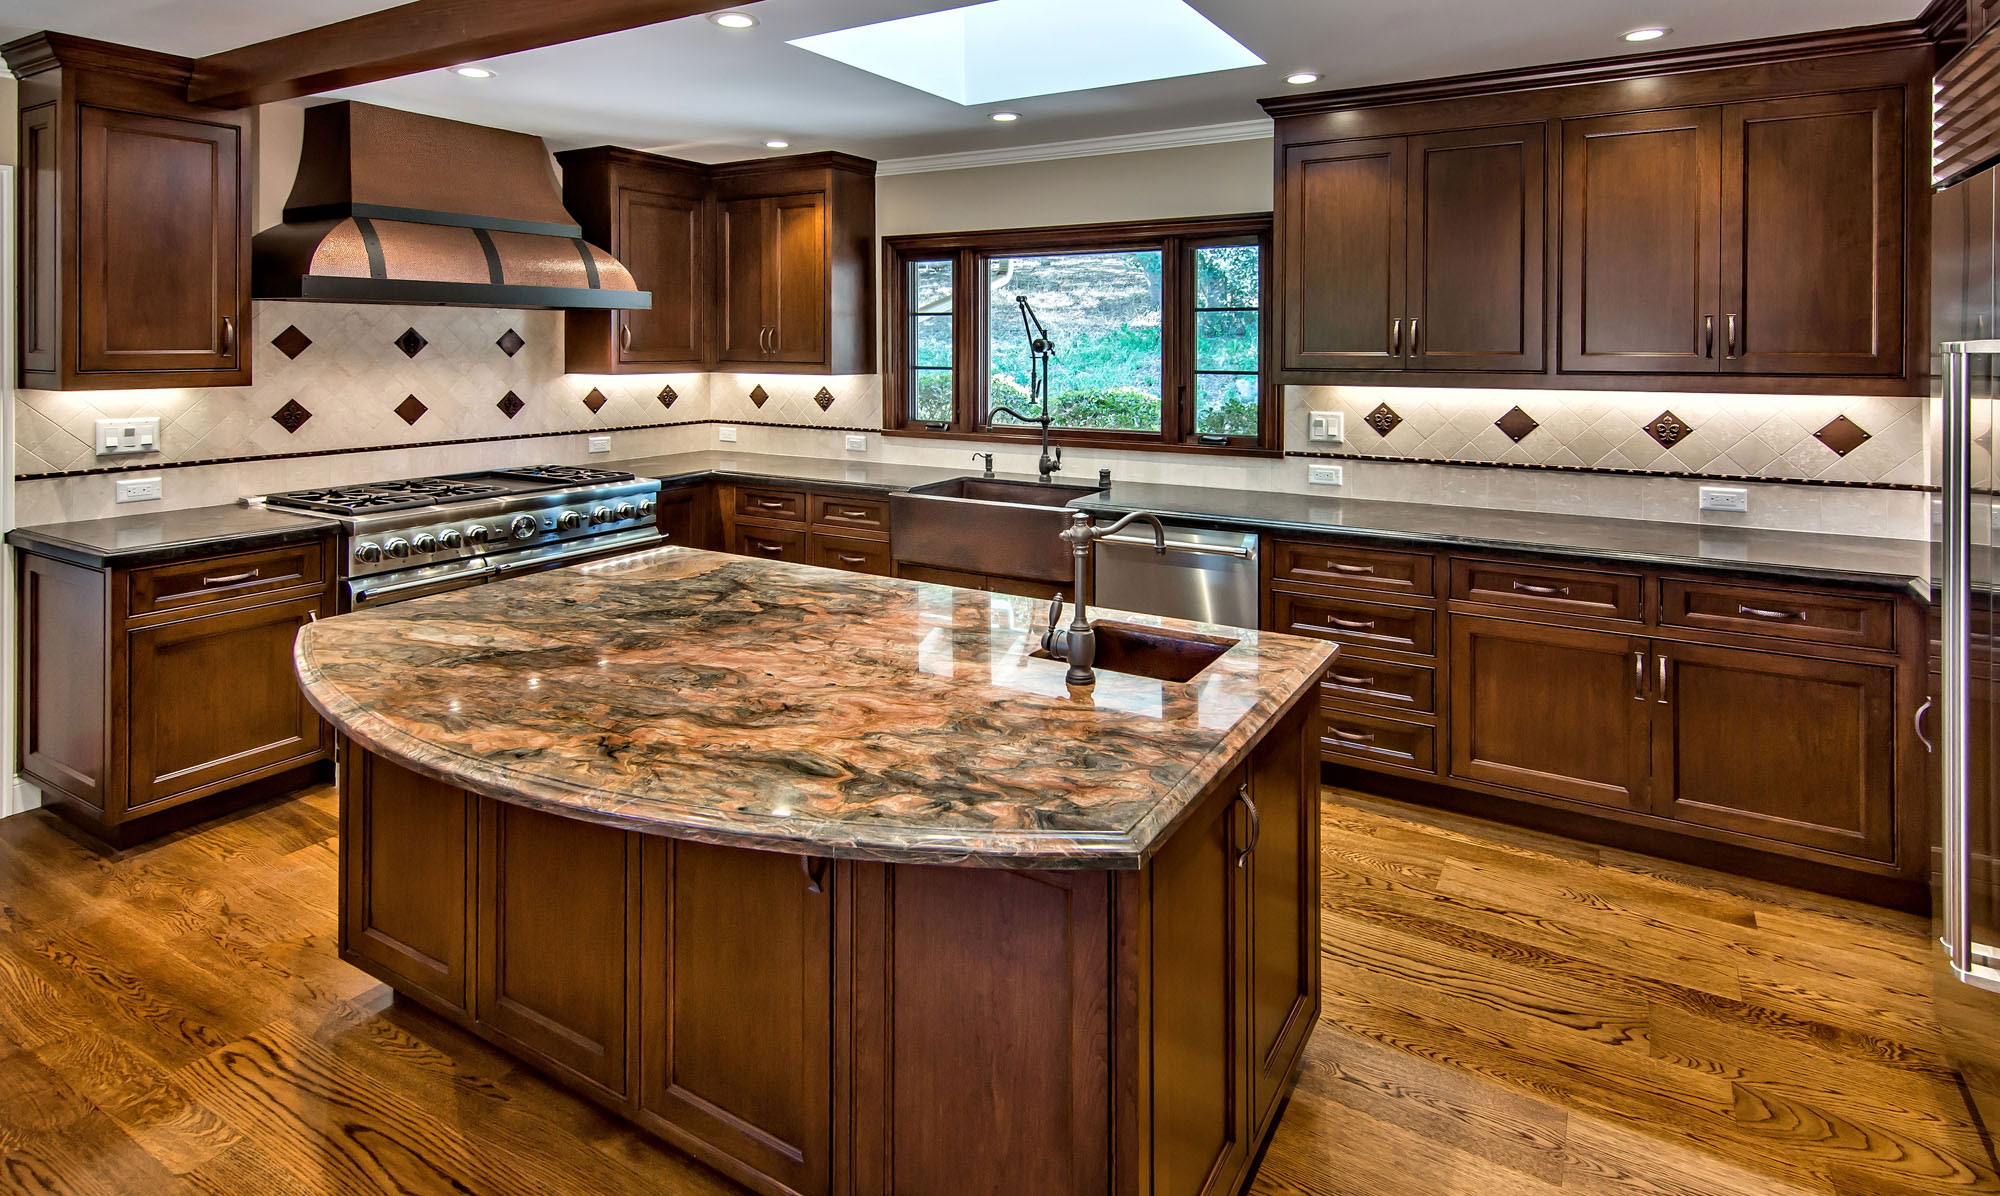 Wm. H. Fry Construction Co. won first place in the Residential Kitchen category in the 5th Annual PureBond® Quality Awards competition with their custom kitchen made with Cherry and Maple PureBond®.